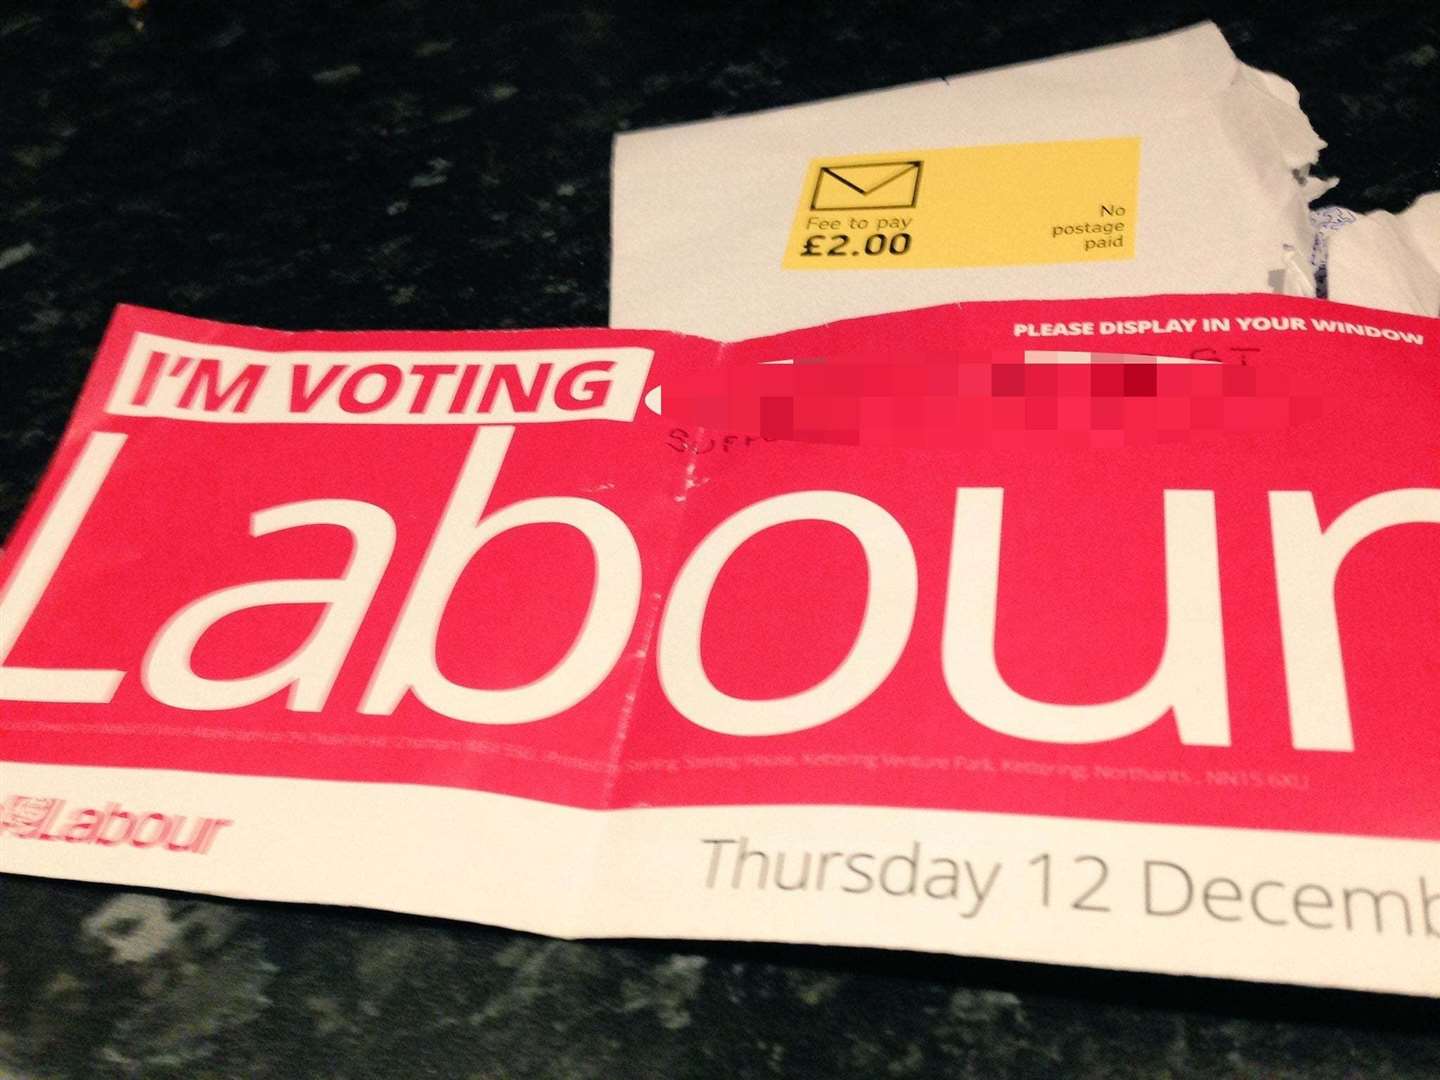 The leaflet received by Cllr Vince Maple. Picture: @vincemaple on Twitter.